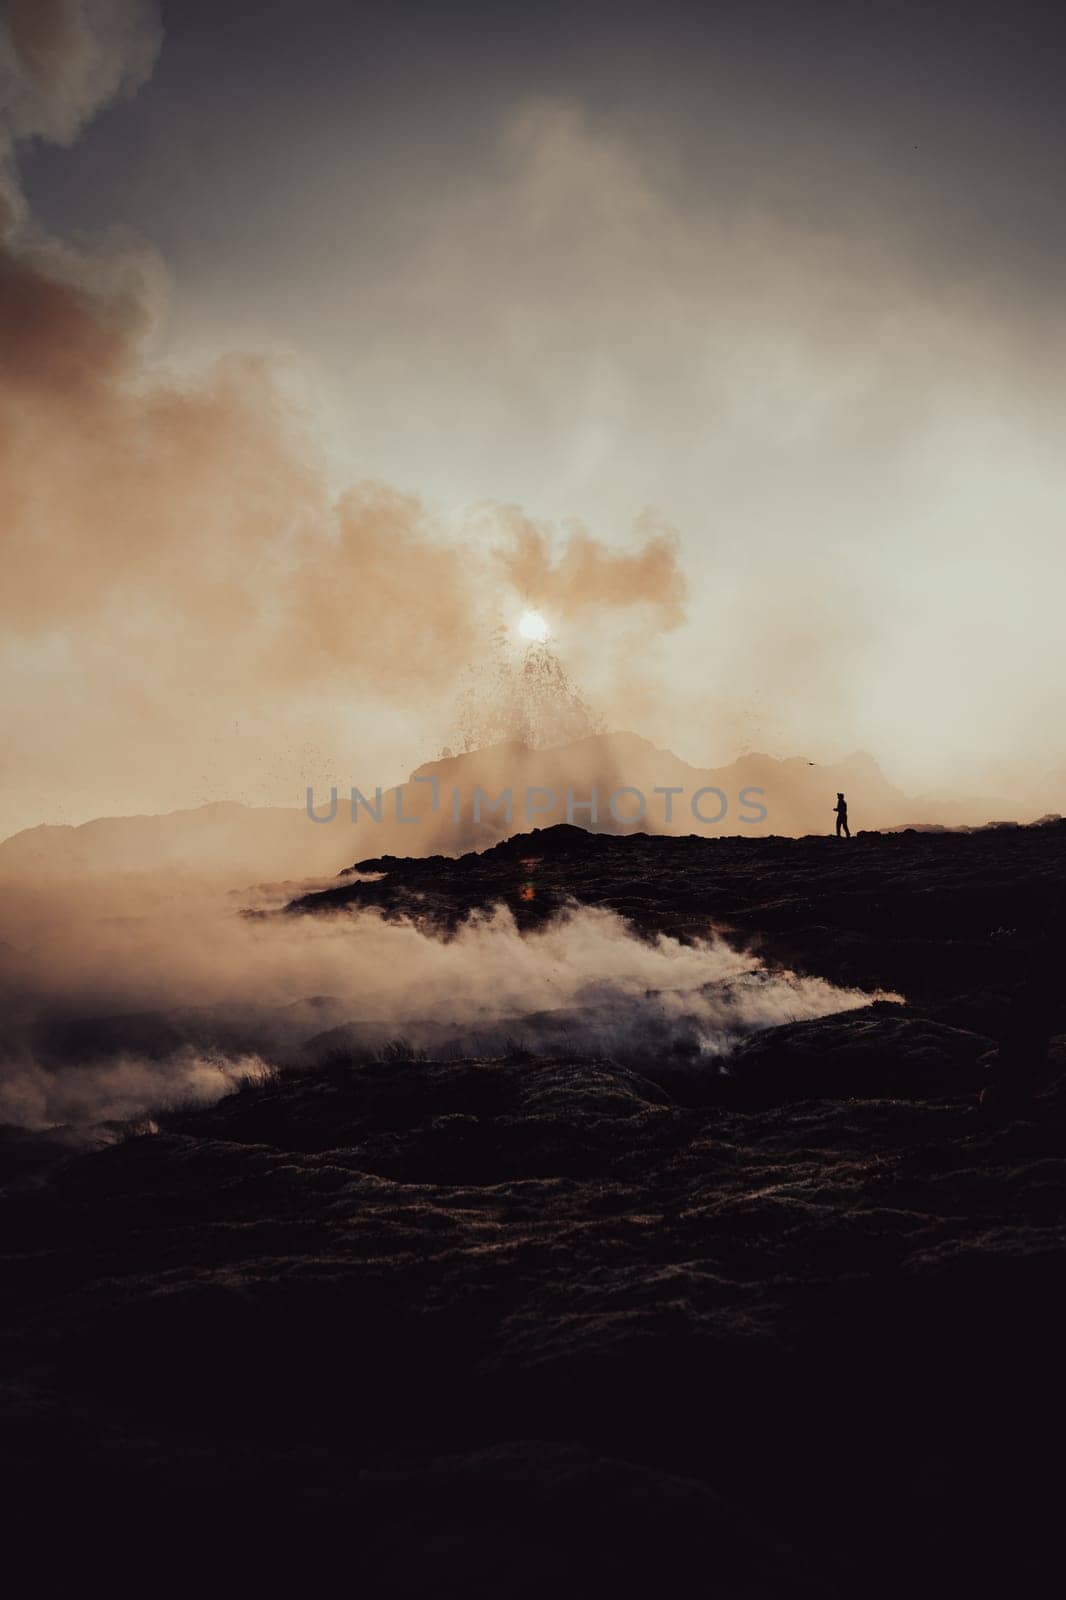 A drone pilot next to the volcano with spattering of boiling erupting molten lava. by Kustov